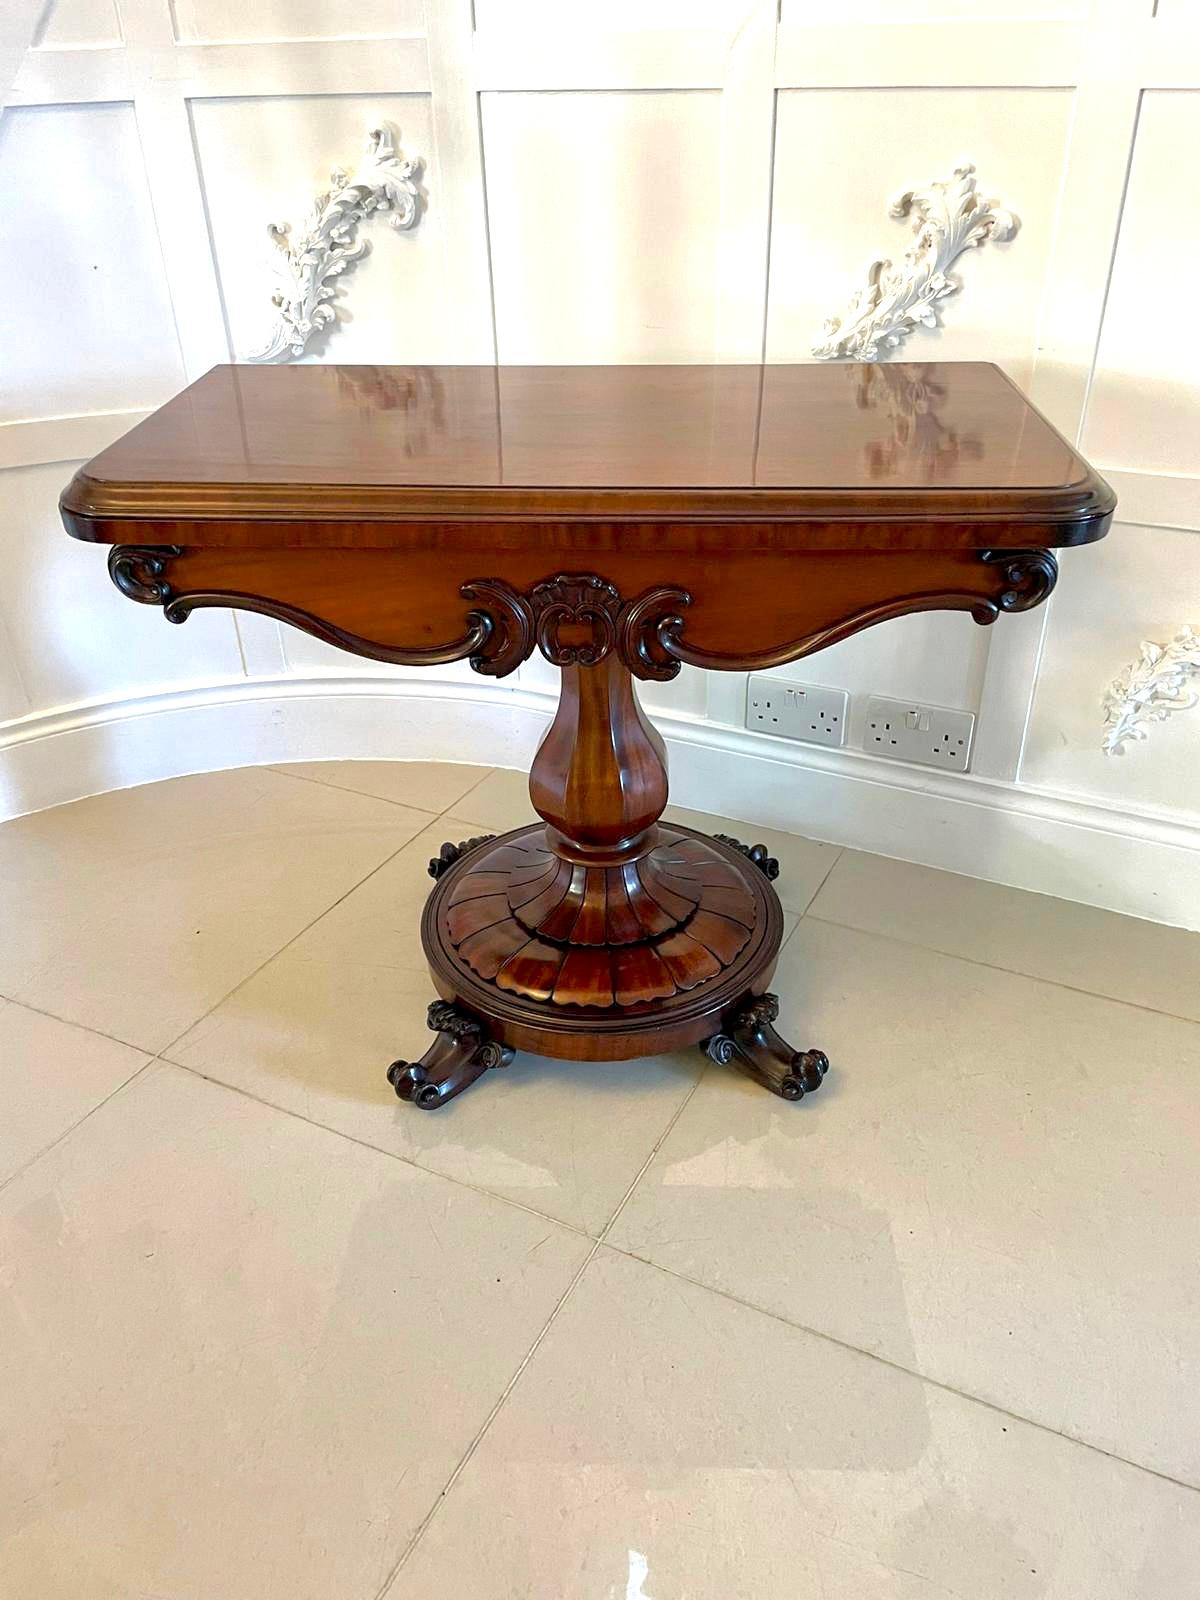 Outstanding quality antique Victorian mahogany card/side table having an outstanding quality mahogany fold over swivel top with a moulded edge opening to reveal a green baize interior above a shaped carved mahogany frieze.  It is supported on an